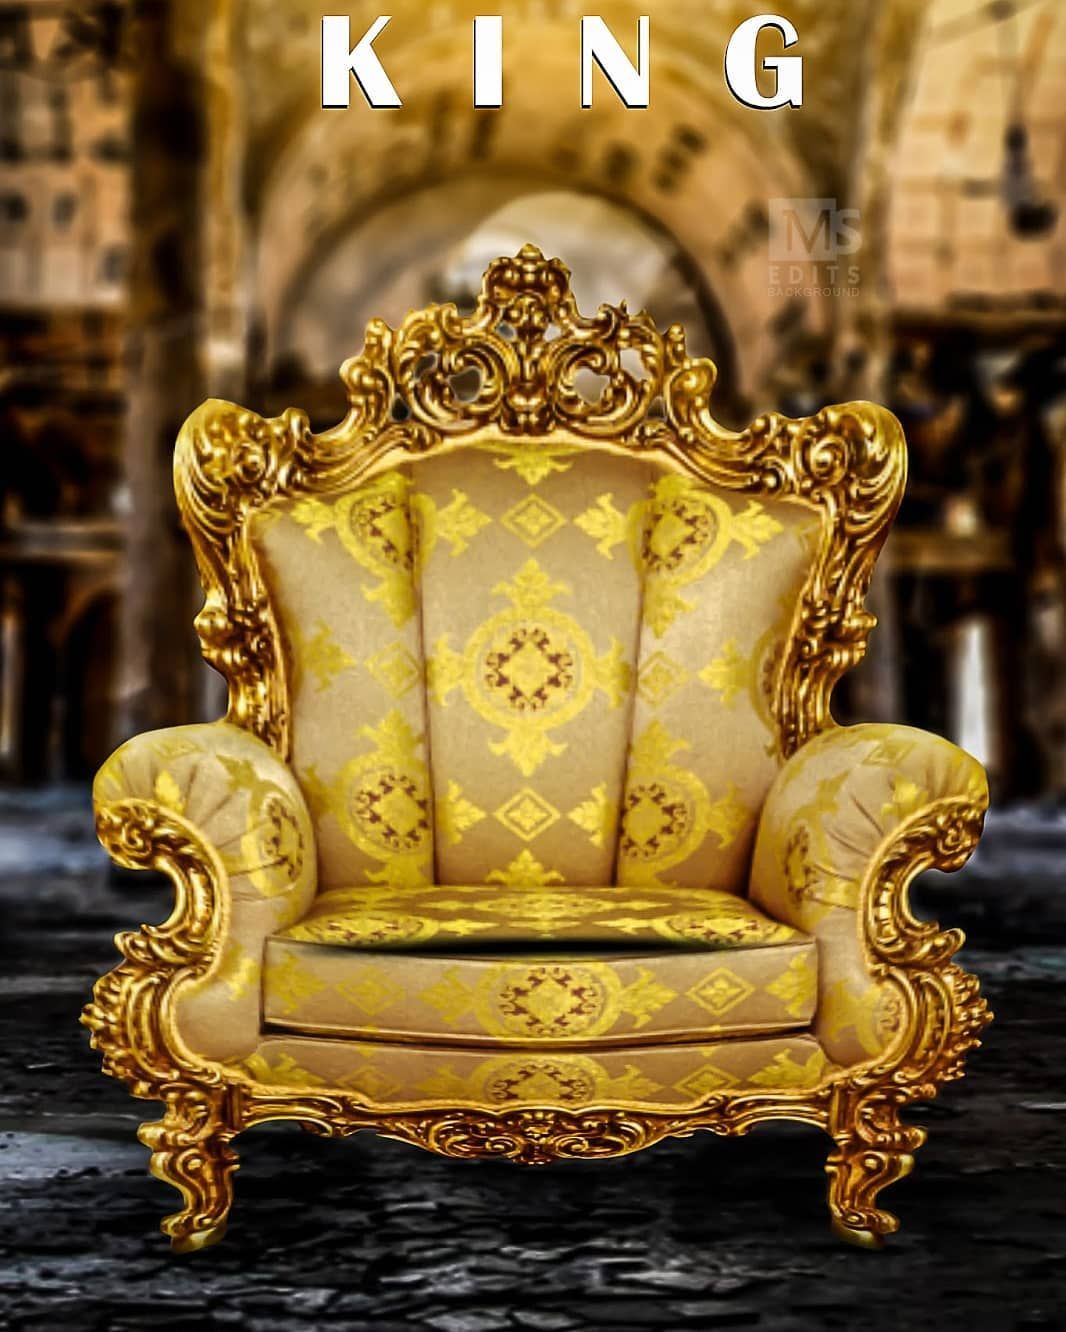 6190 King Chair Stock Photos and Images  123RF